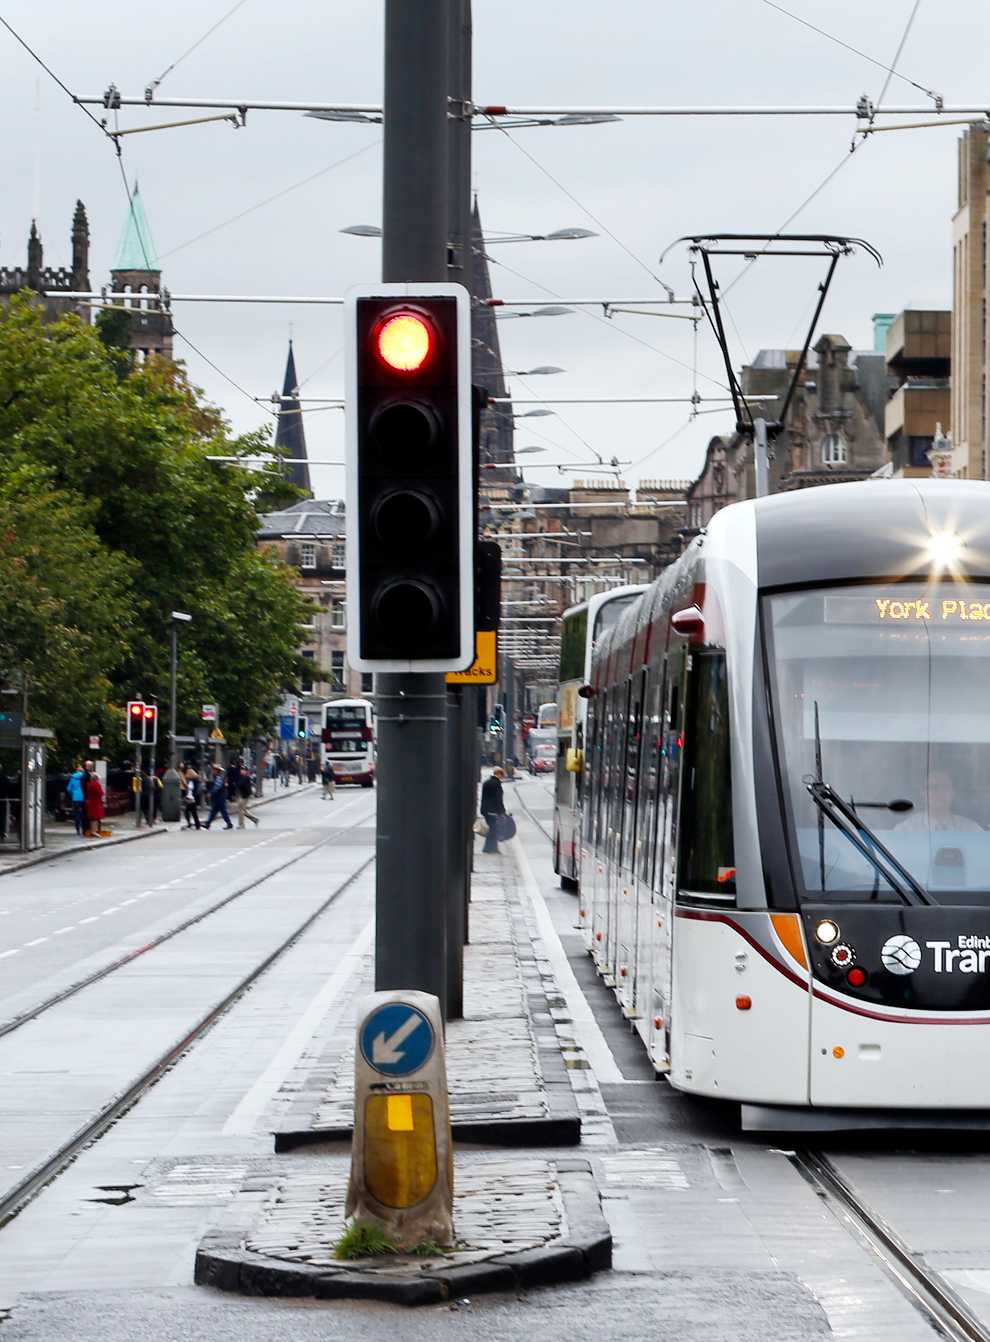 The Edinburgh Tram Inquiry will cost more than £13m, Transport Scotland has projected (Danny Lawson/PA)